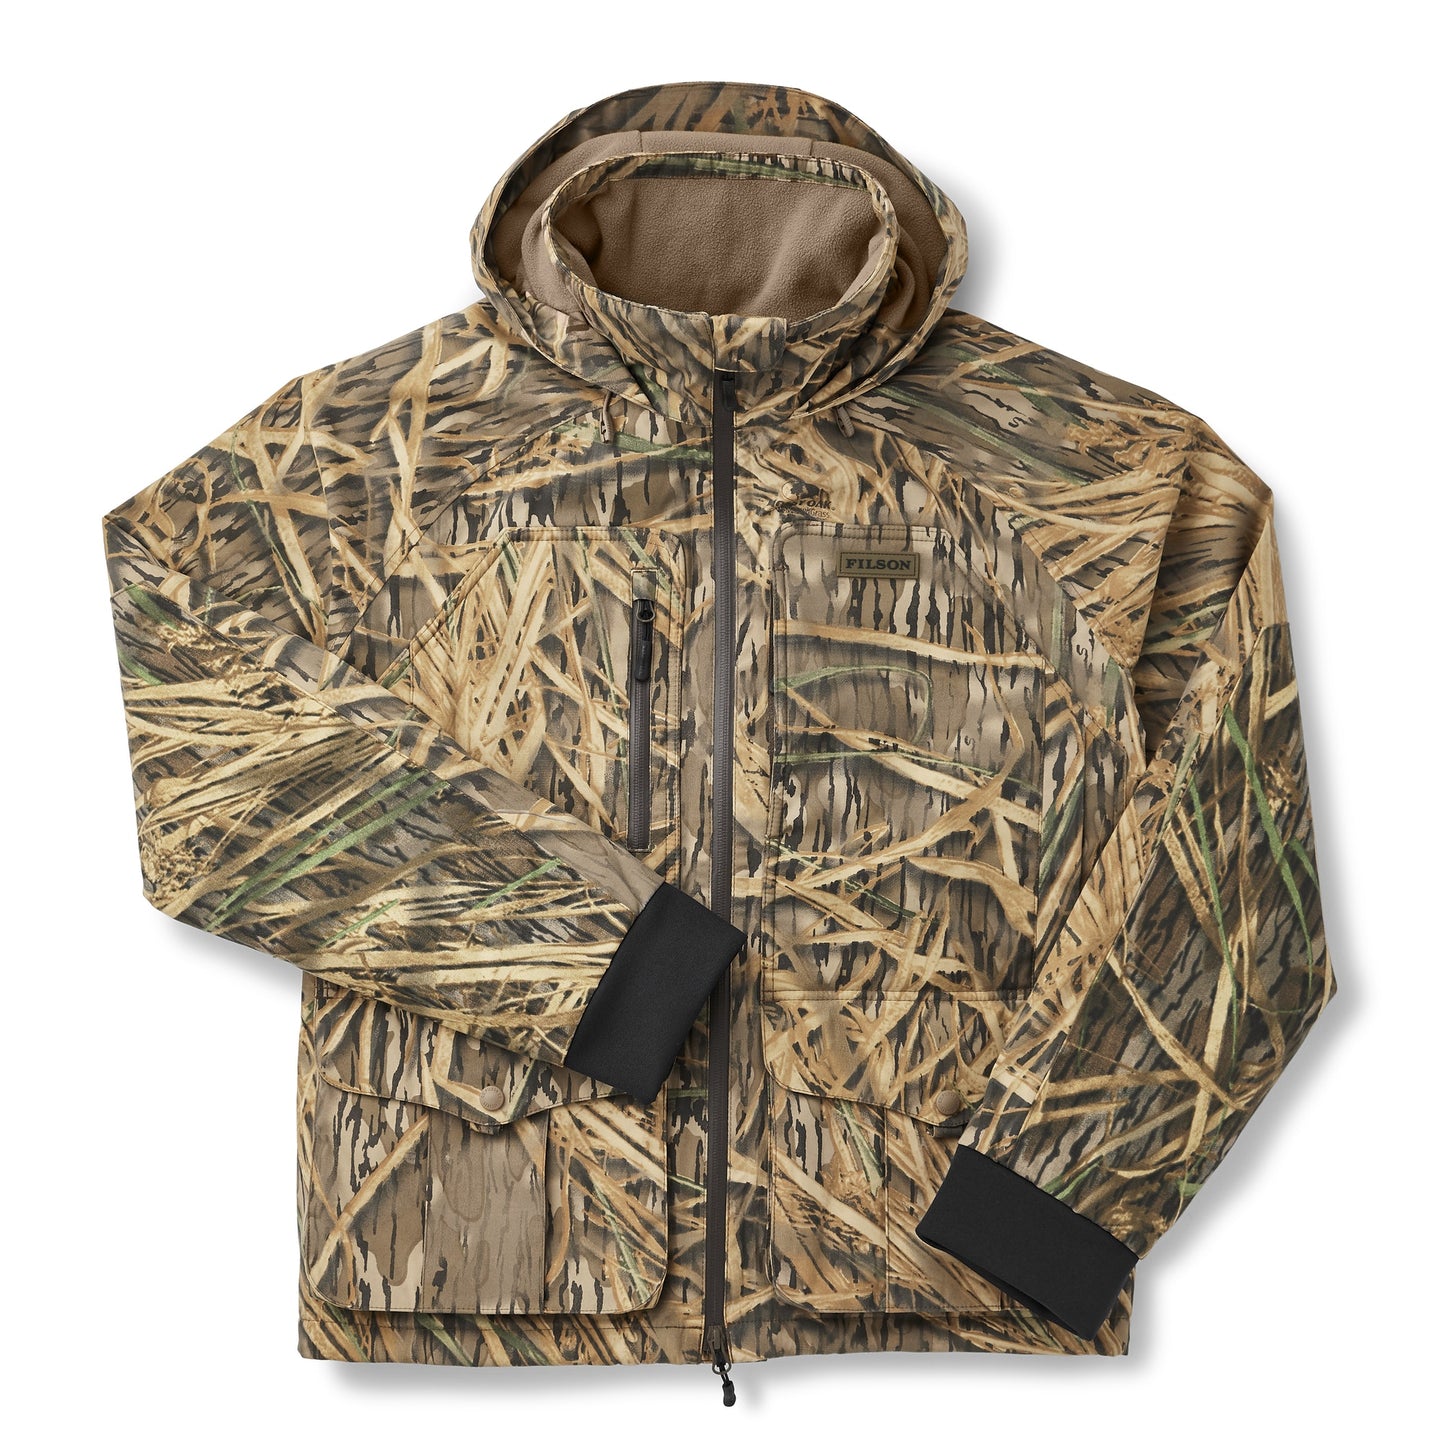 Load image into Gallery viewer, Skagit Waterfowl Jacket by Filson
